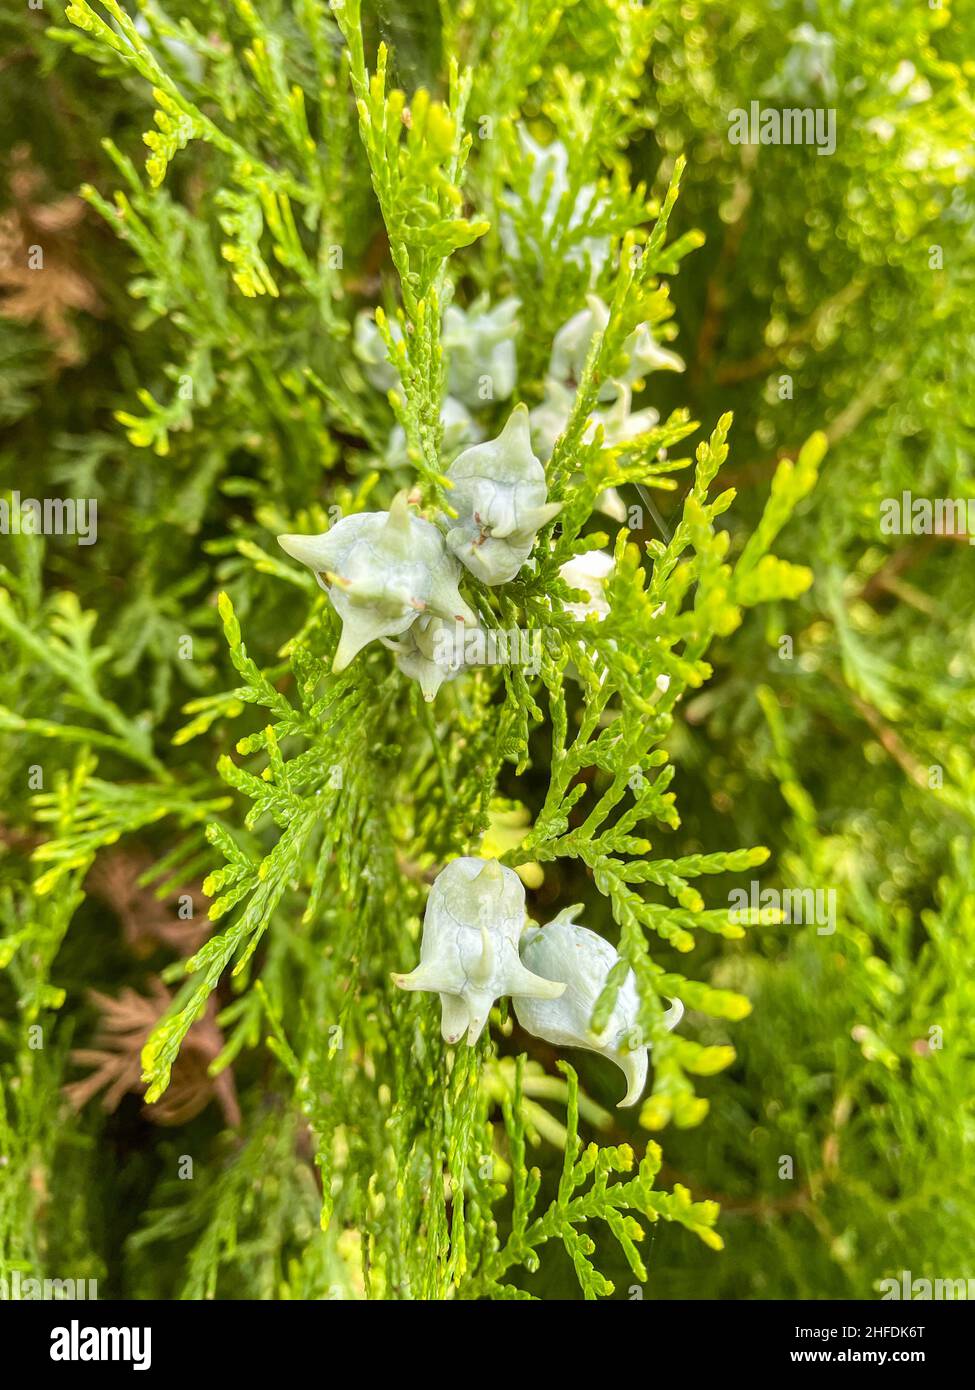 Oriental thuja (Platycladus orientalis) is a small, slow-growing tree native to northwestern China, Korea, and the Russian Far East. Stock Photo